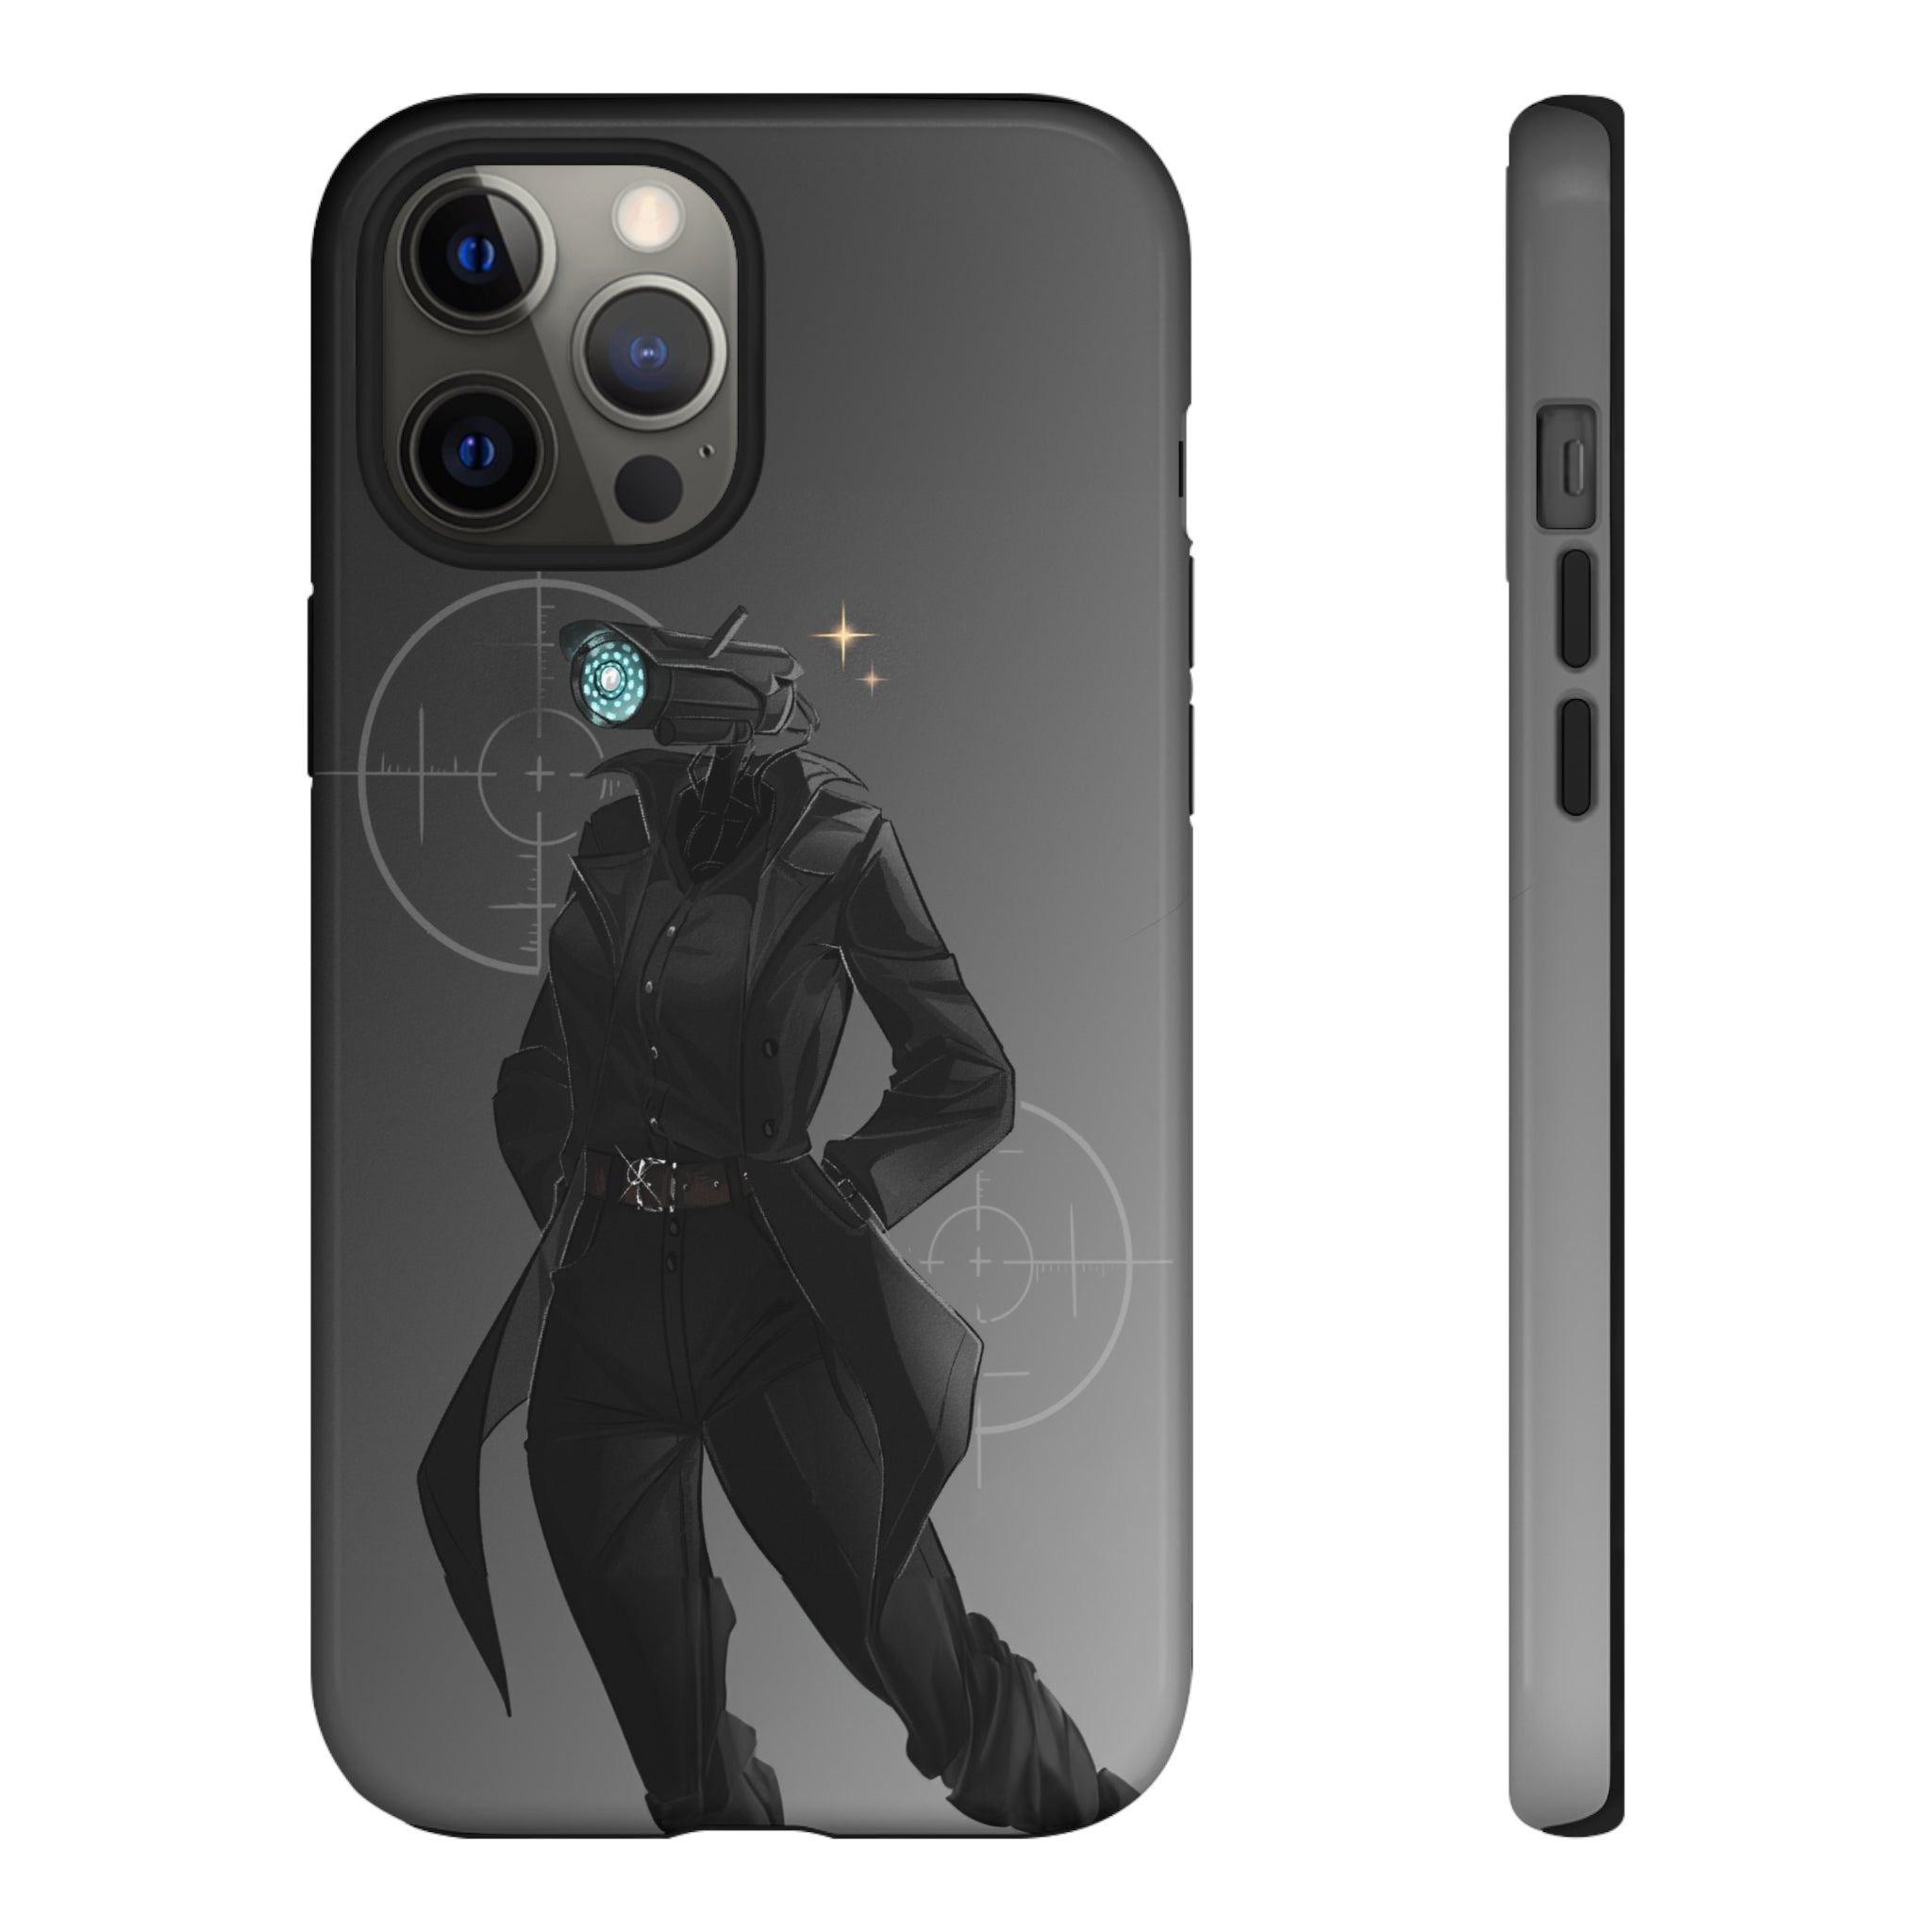 Phone case featuring Skibidi Toilet’s Camera Woman and crosshairs